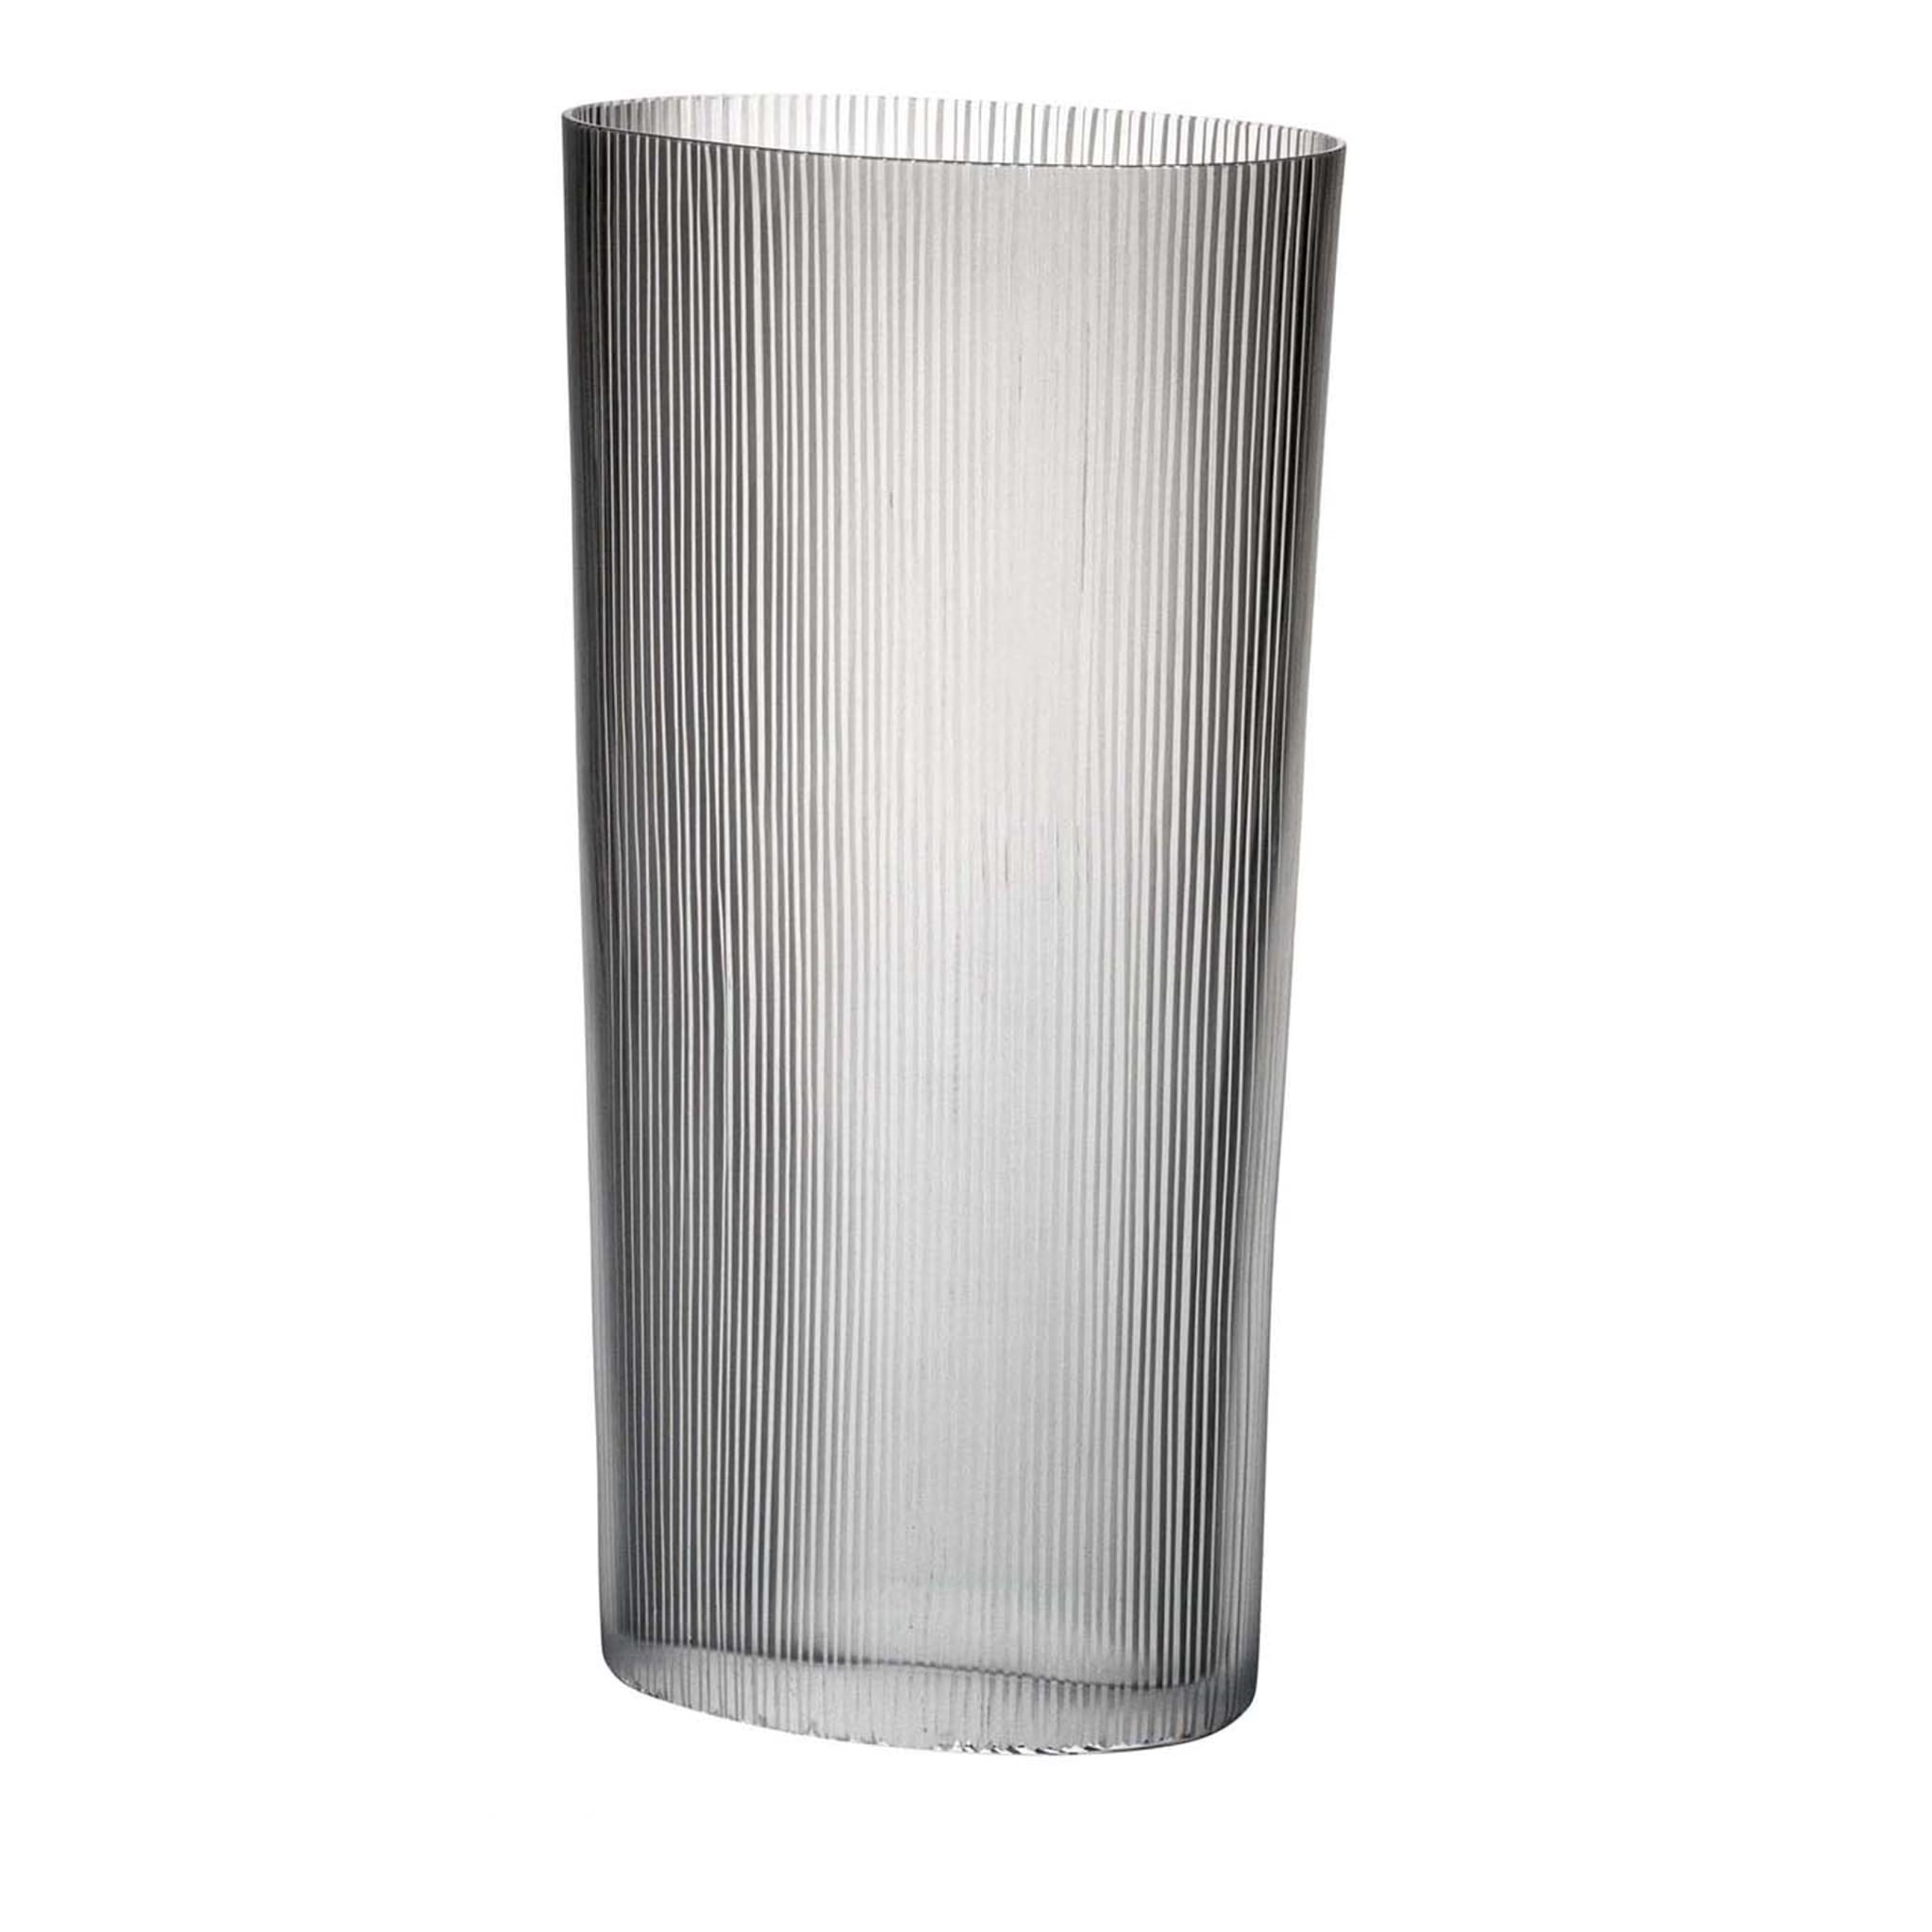 Millemolature Tall Ridged Oval-Based Vase by Carlo Moretti - Main view